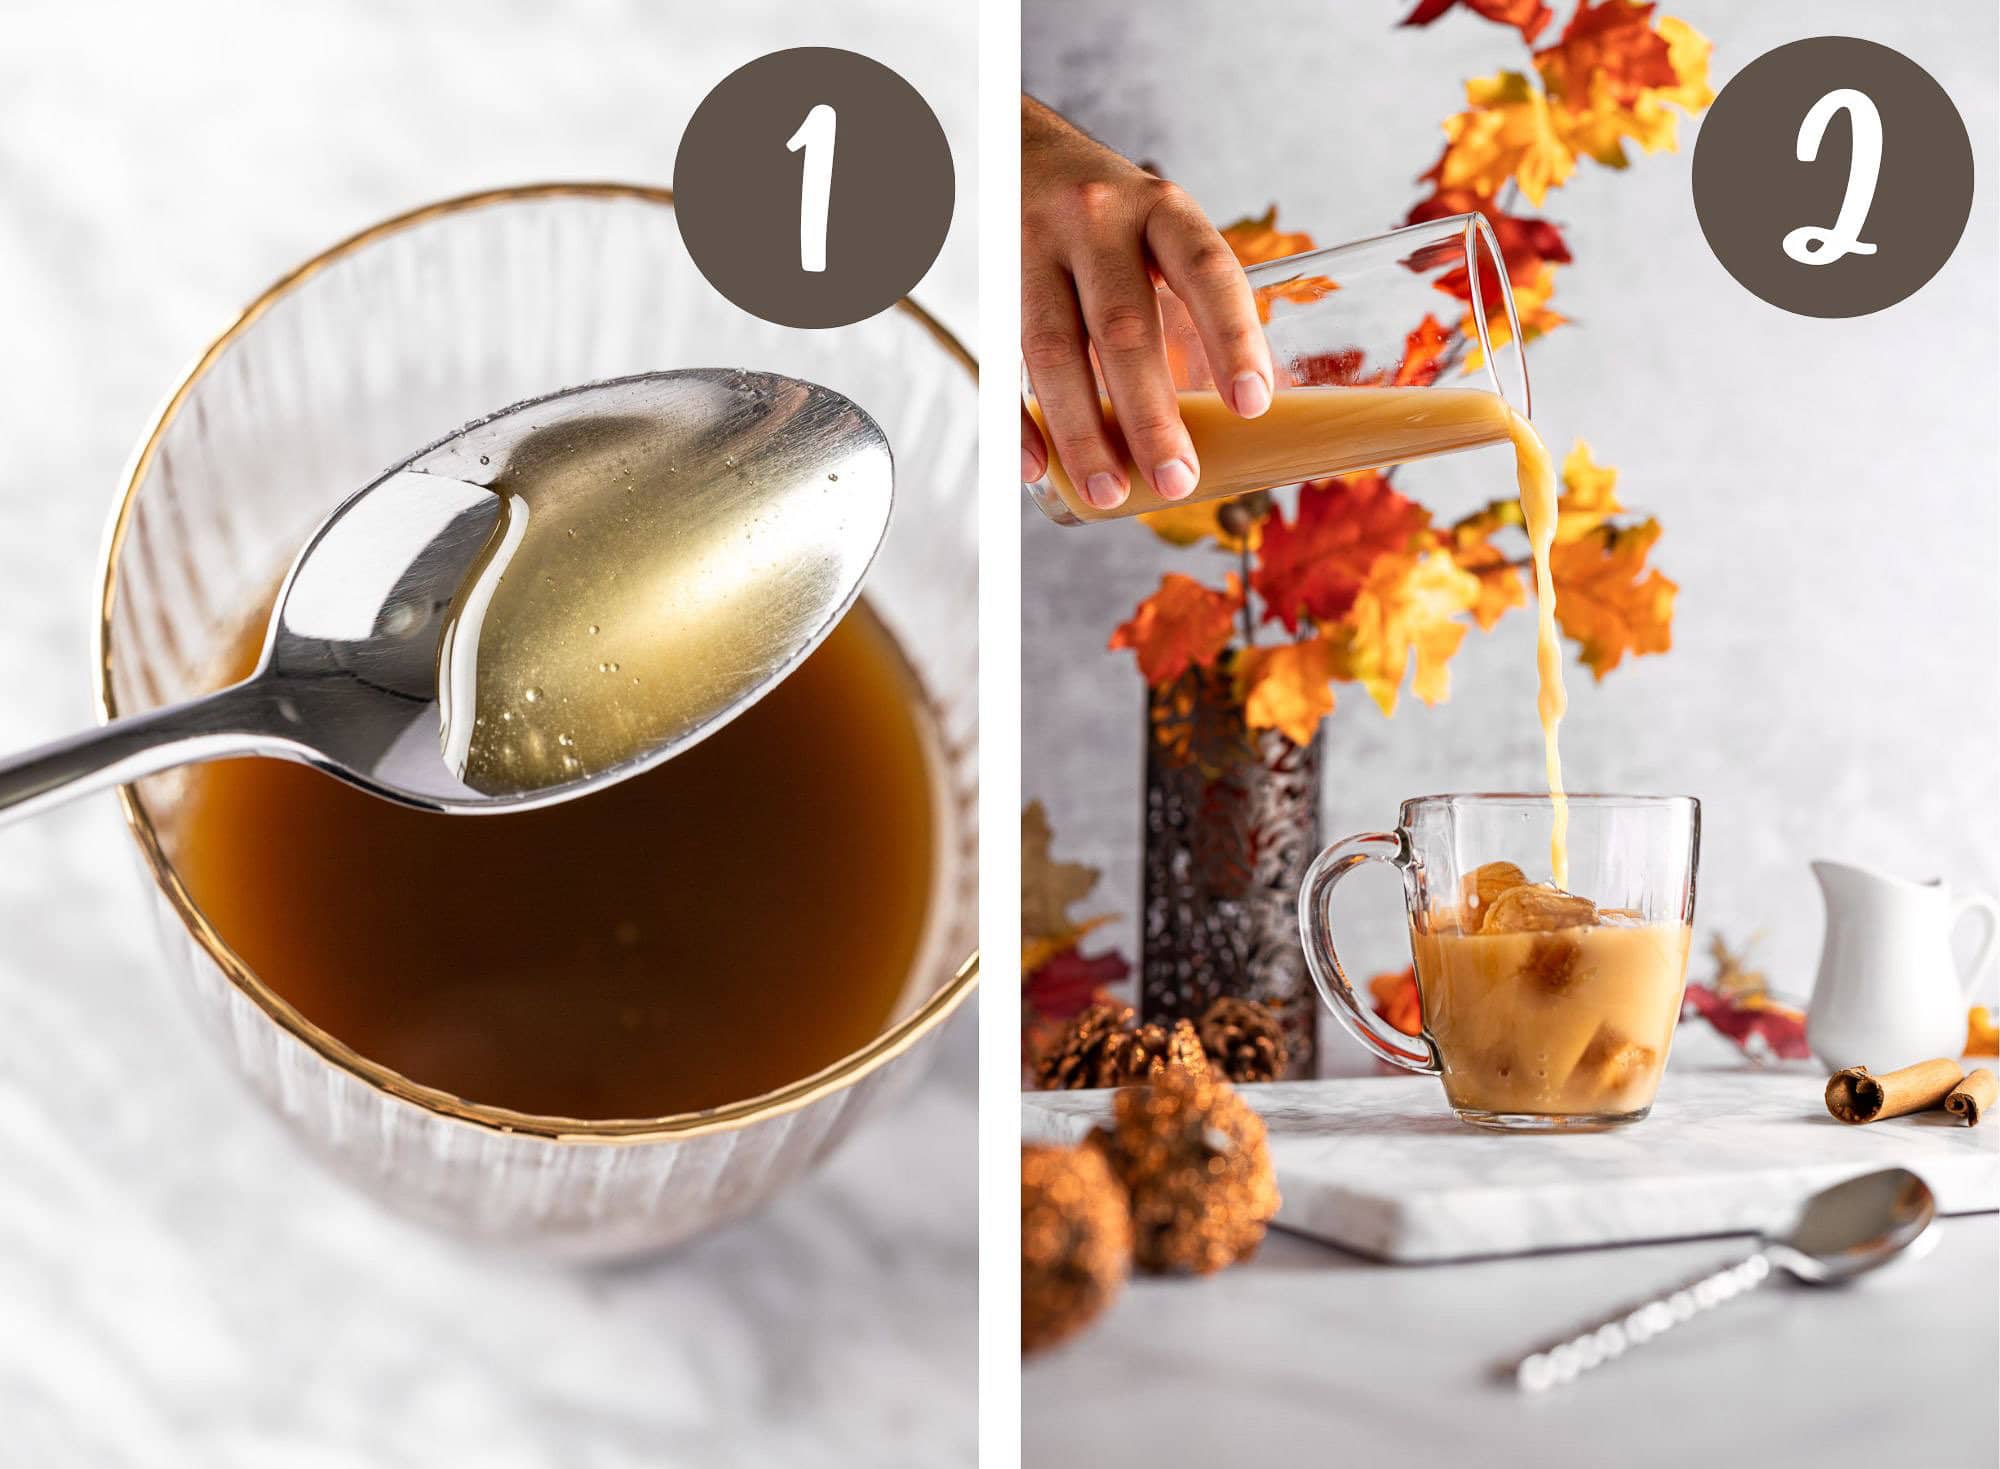 A collage of process photos illustrating the steps to make an iced chai tea latte.